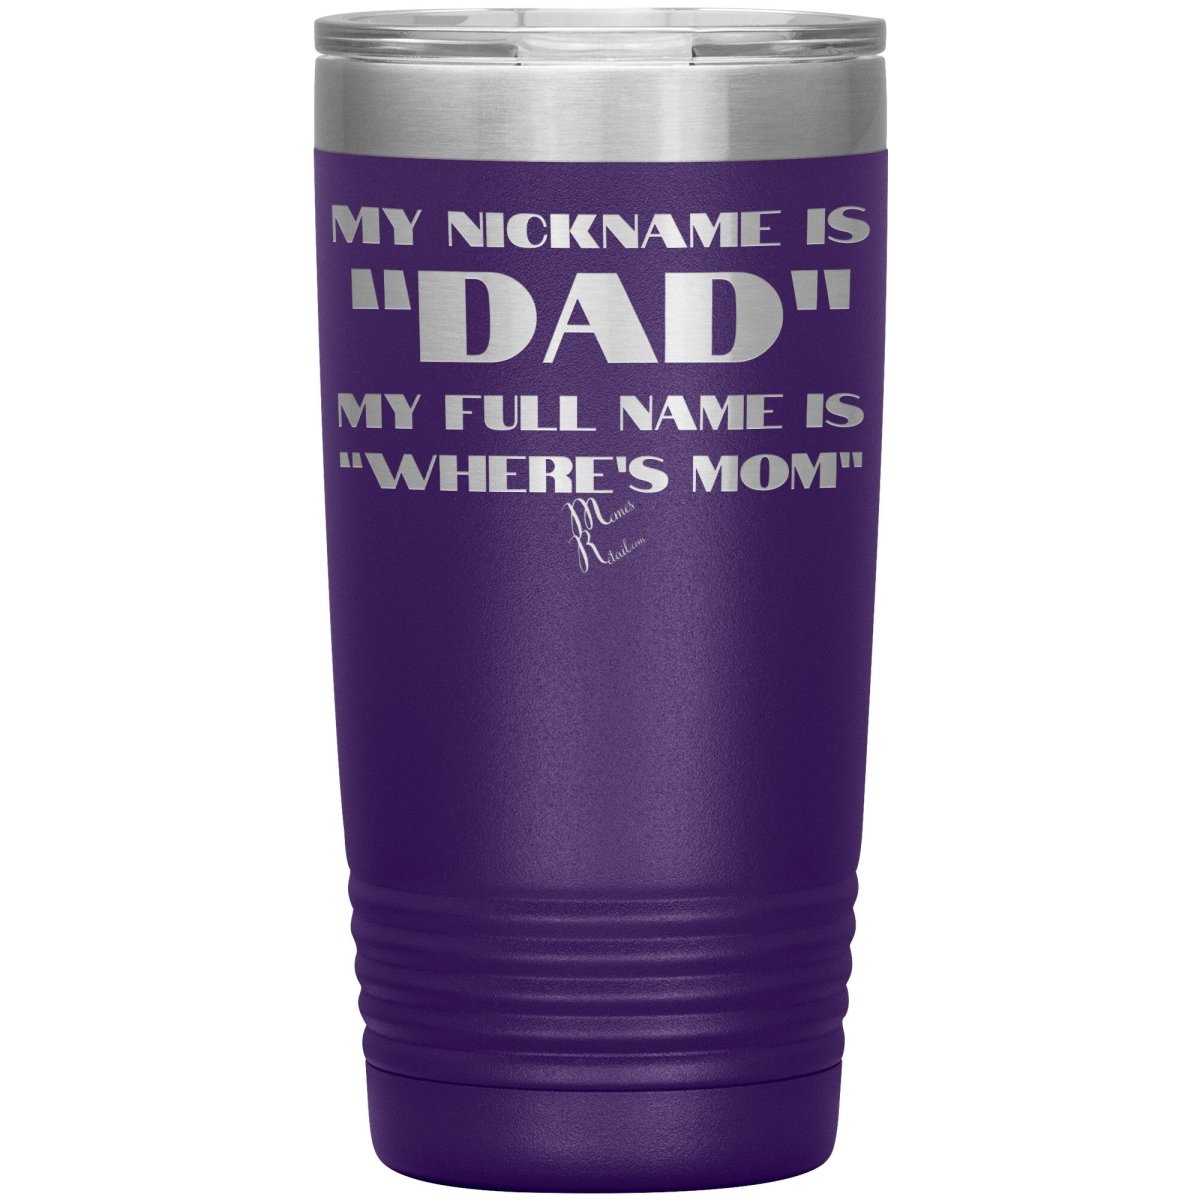 My Nickname is "Dad", My Full Name is "Where's Mom" Tumblers, 20oz Insulated Tumbler / Purple - MemesRetail.com